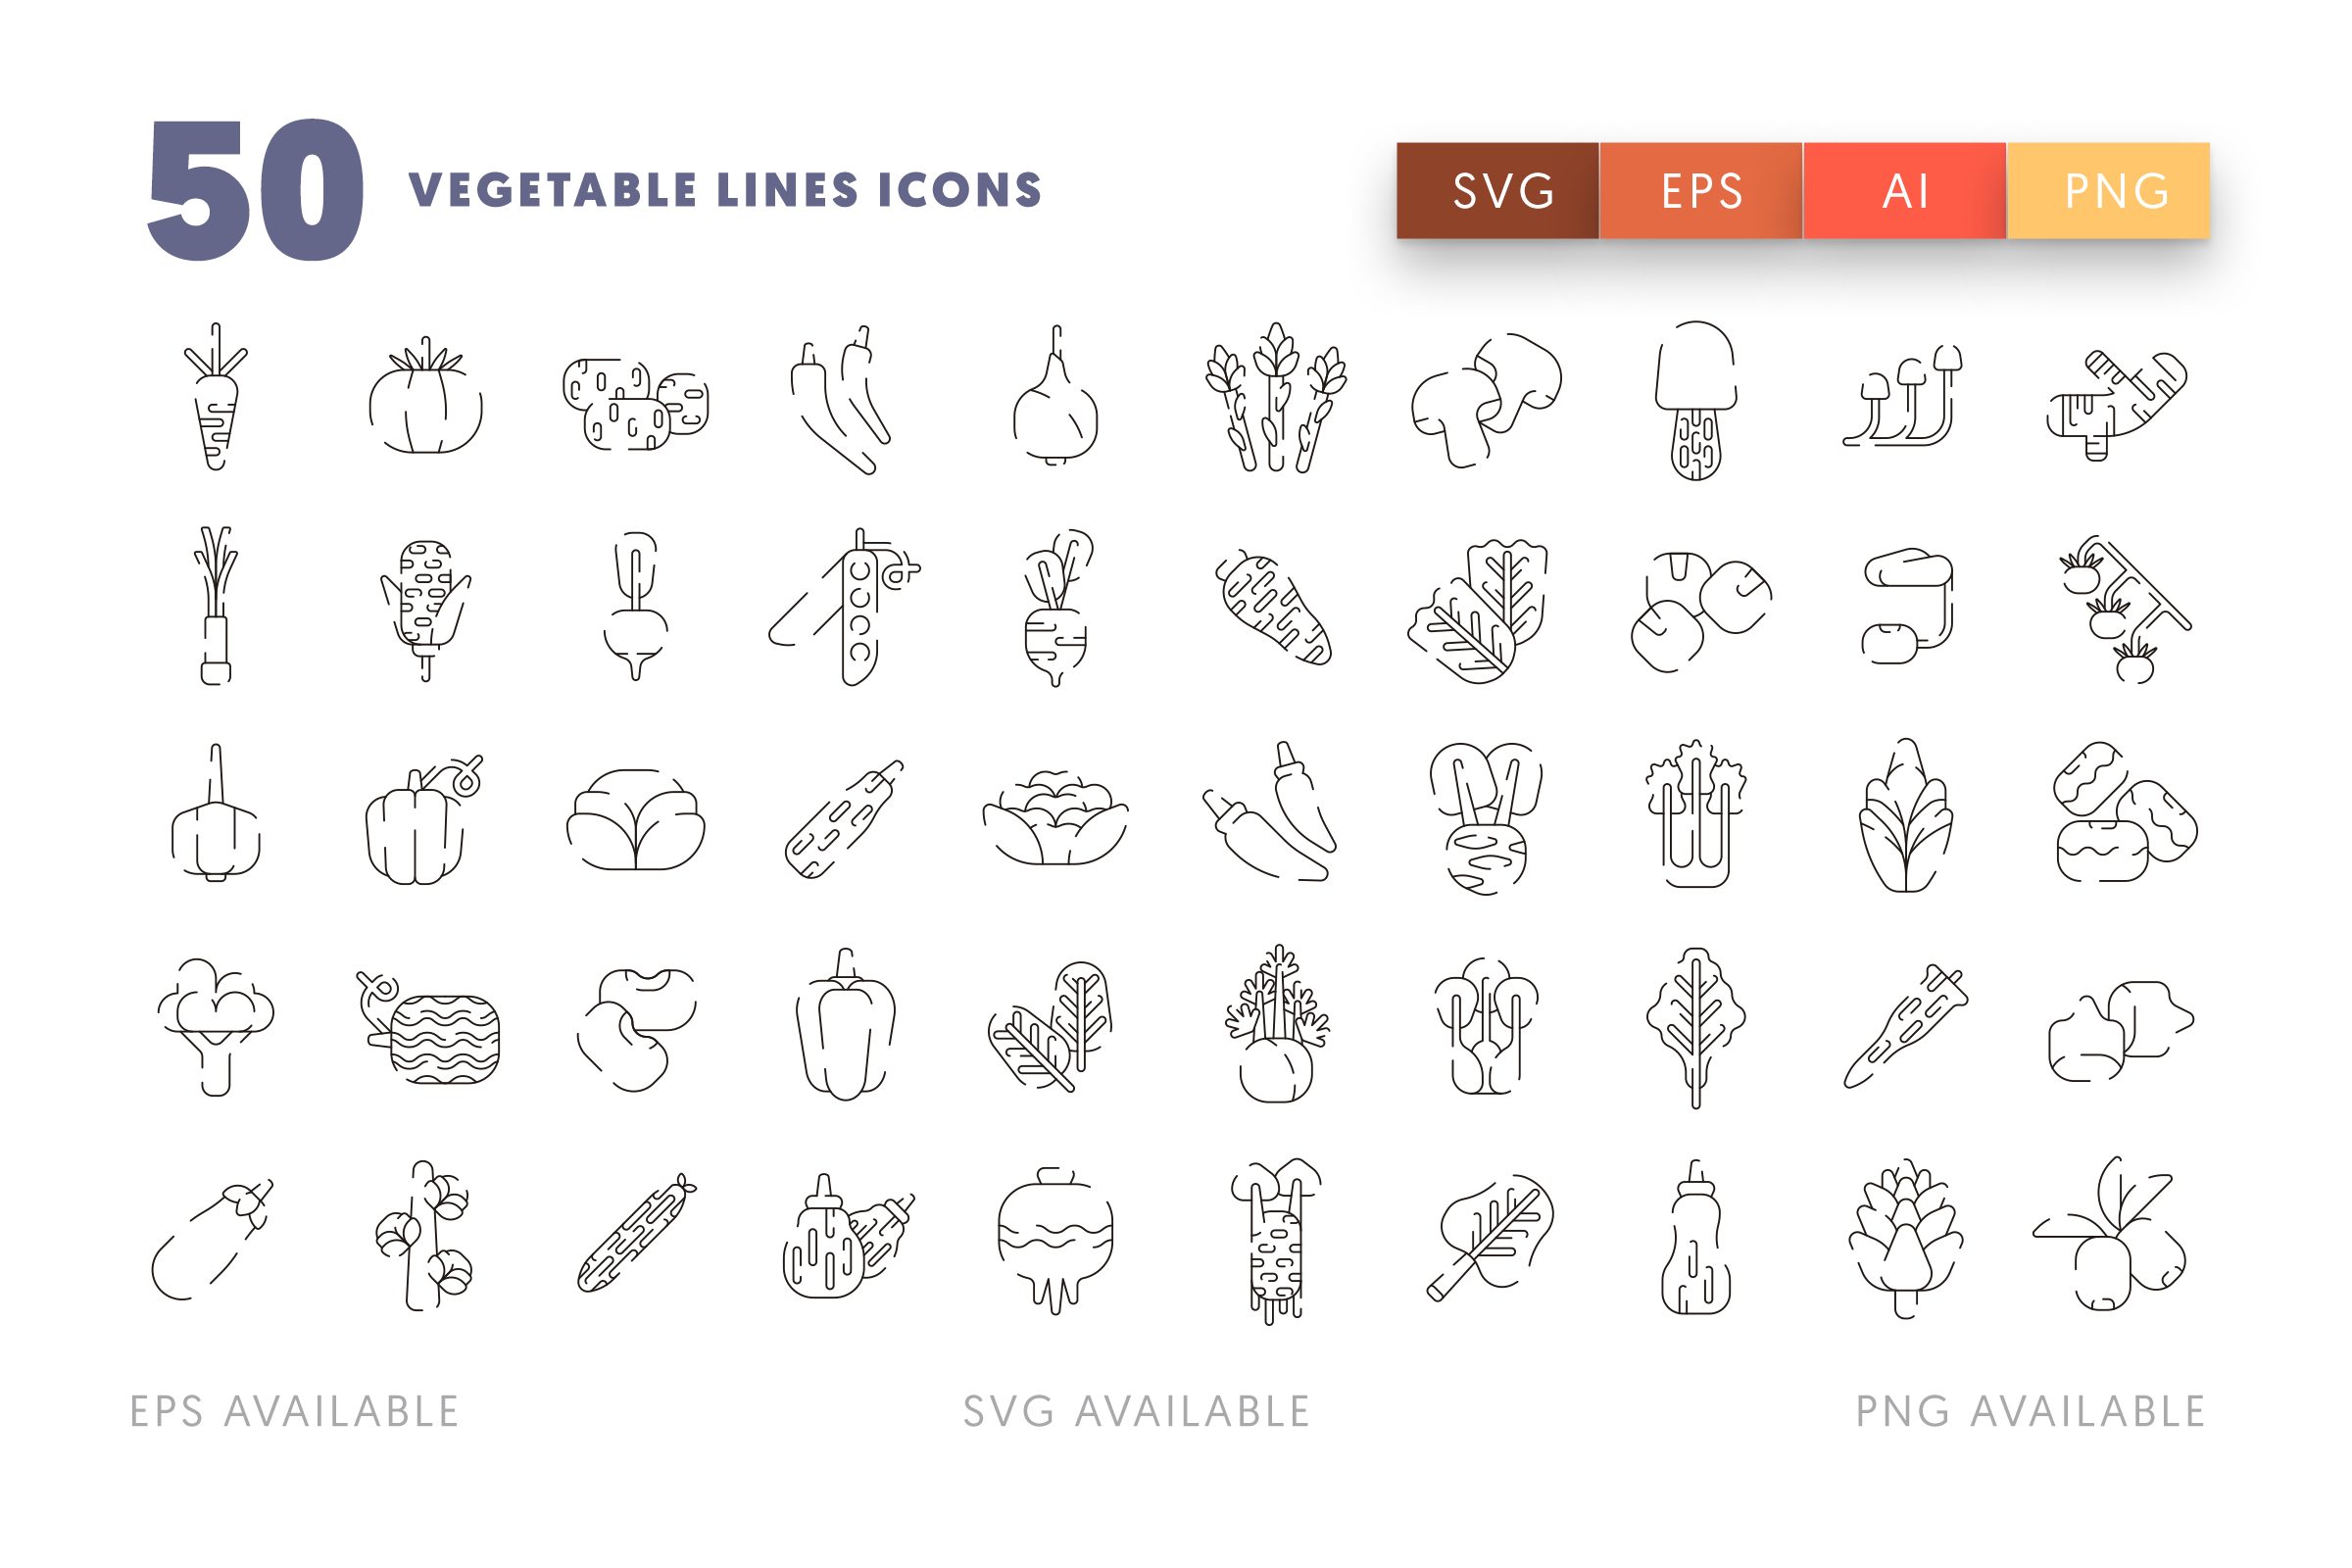 Vegetable Lines icons png/svg/eps